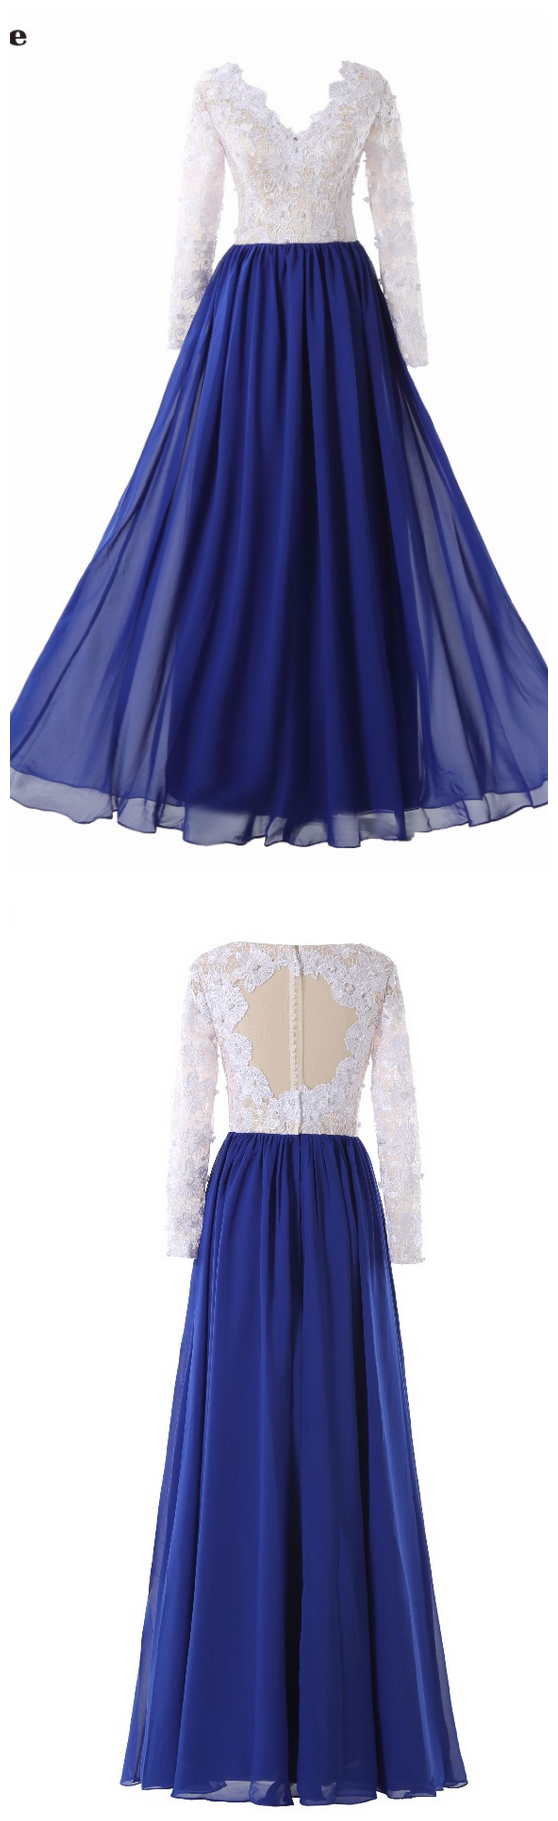 Royal Blue Chiffon White Lace Top Evening Dresses Long Sleeves Prom Party Gown